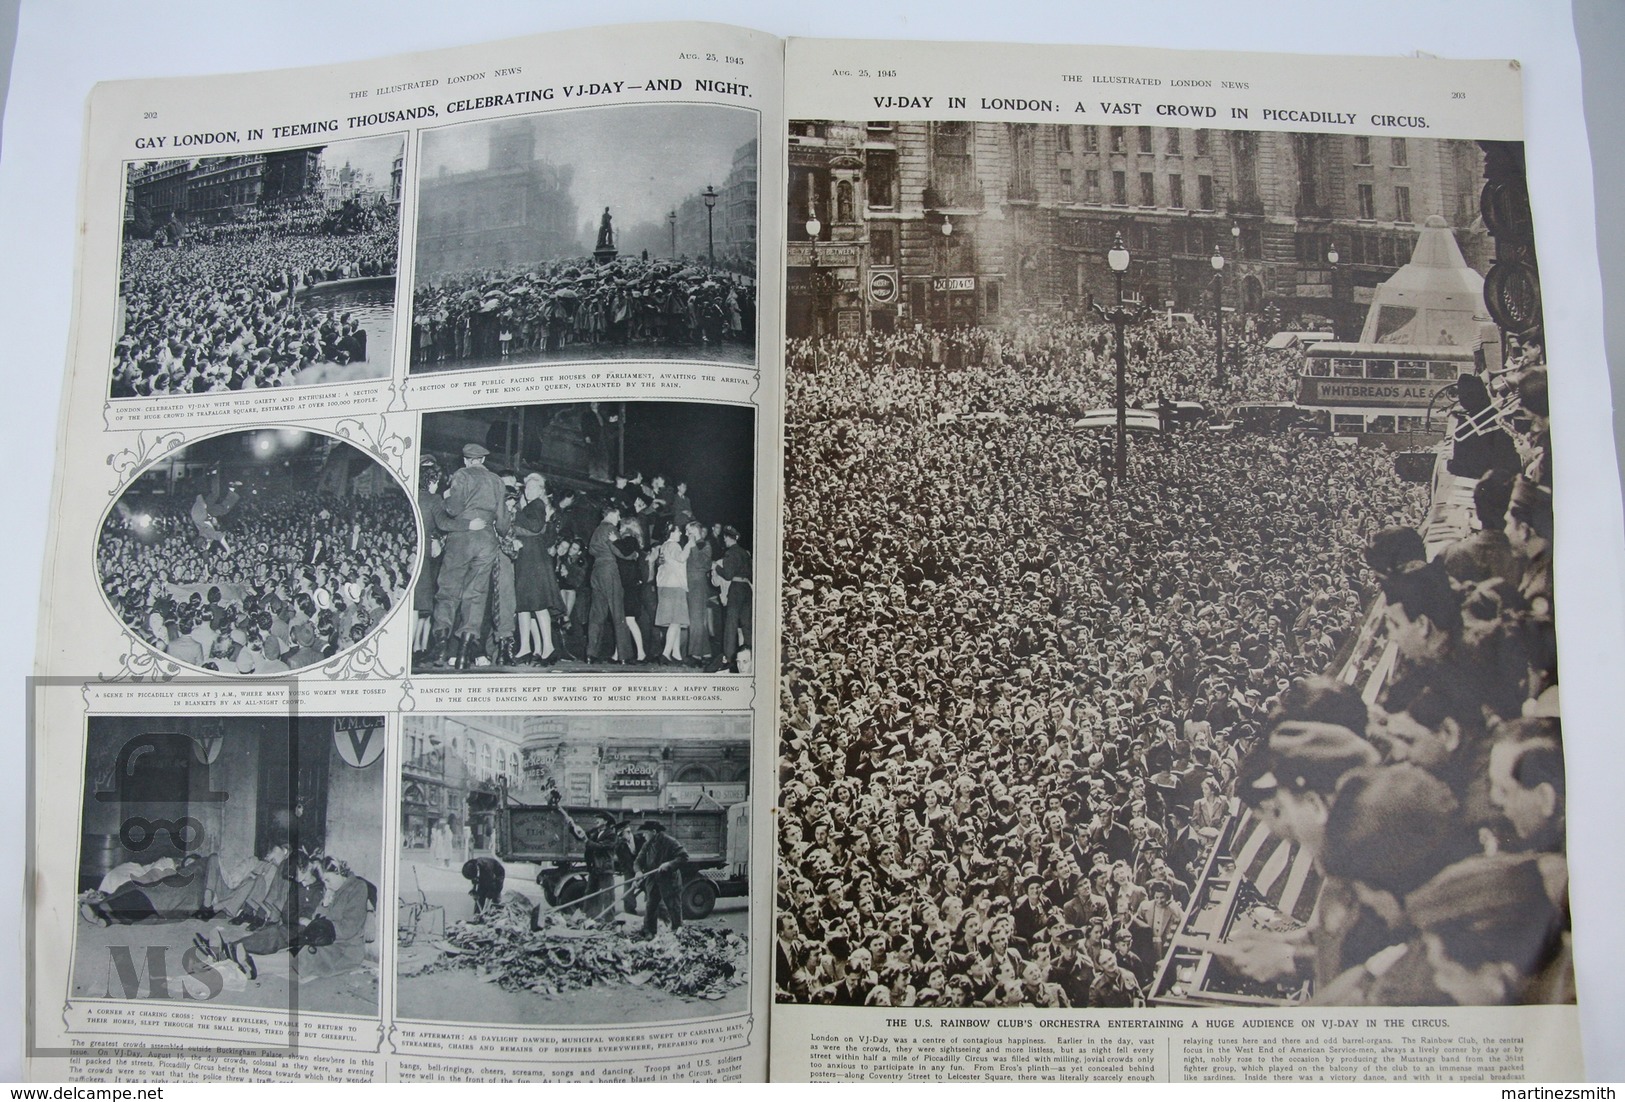 WWII The Illustrated London News, August 25, 1945 - Their Majesties And The Princesses Of England - History